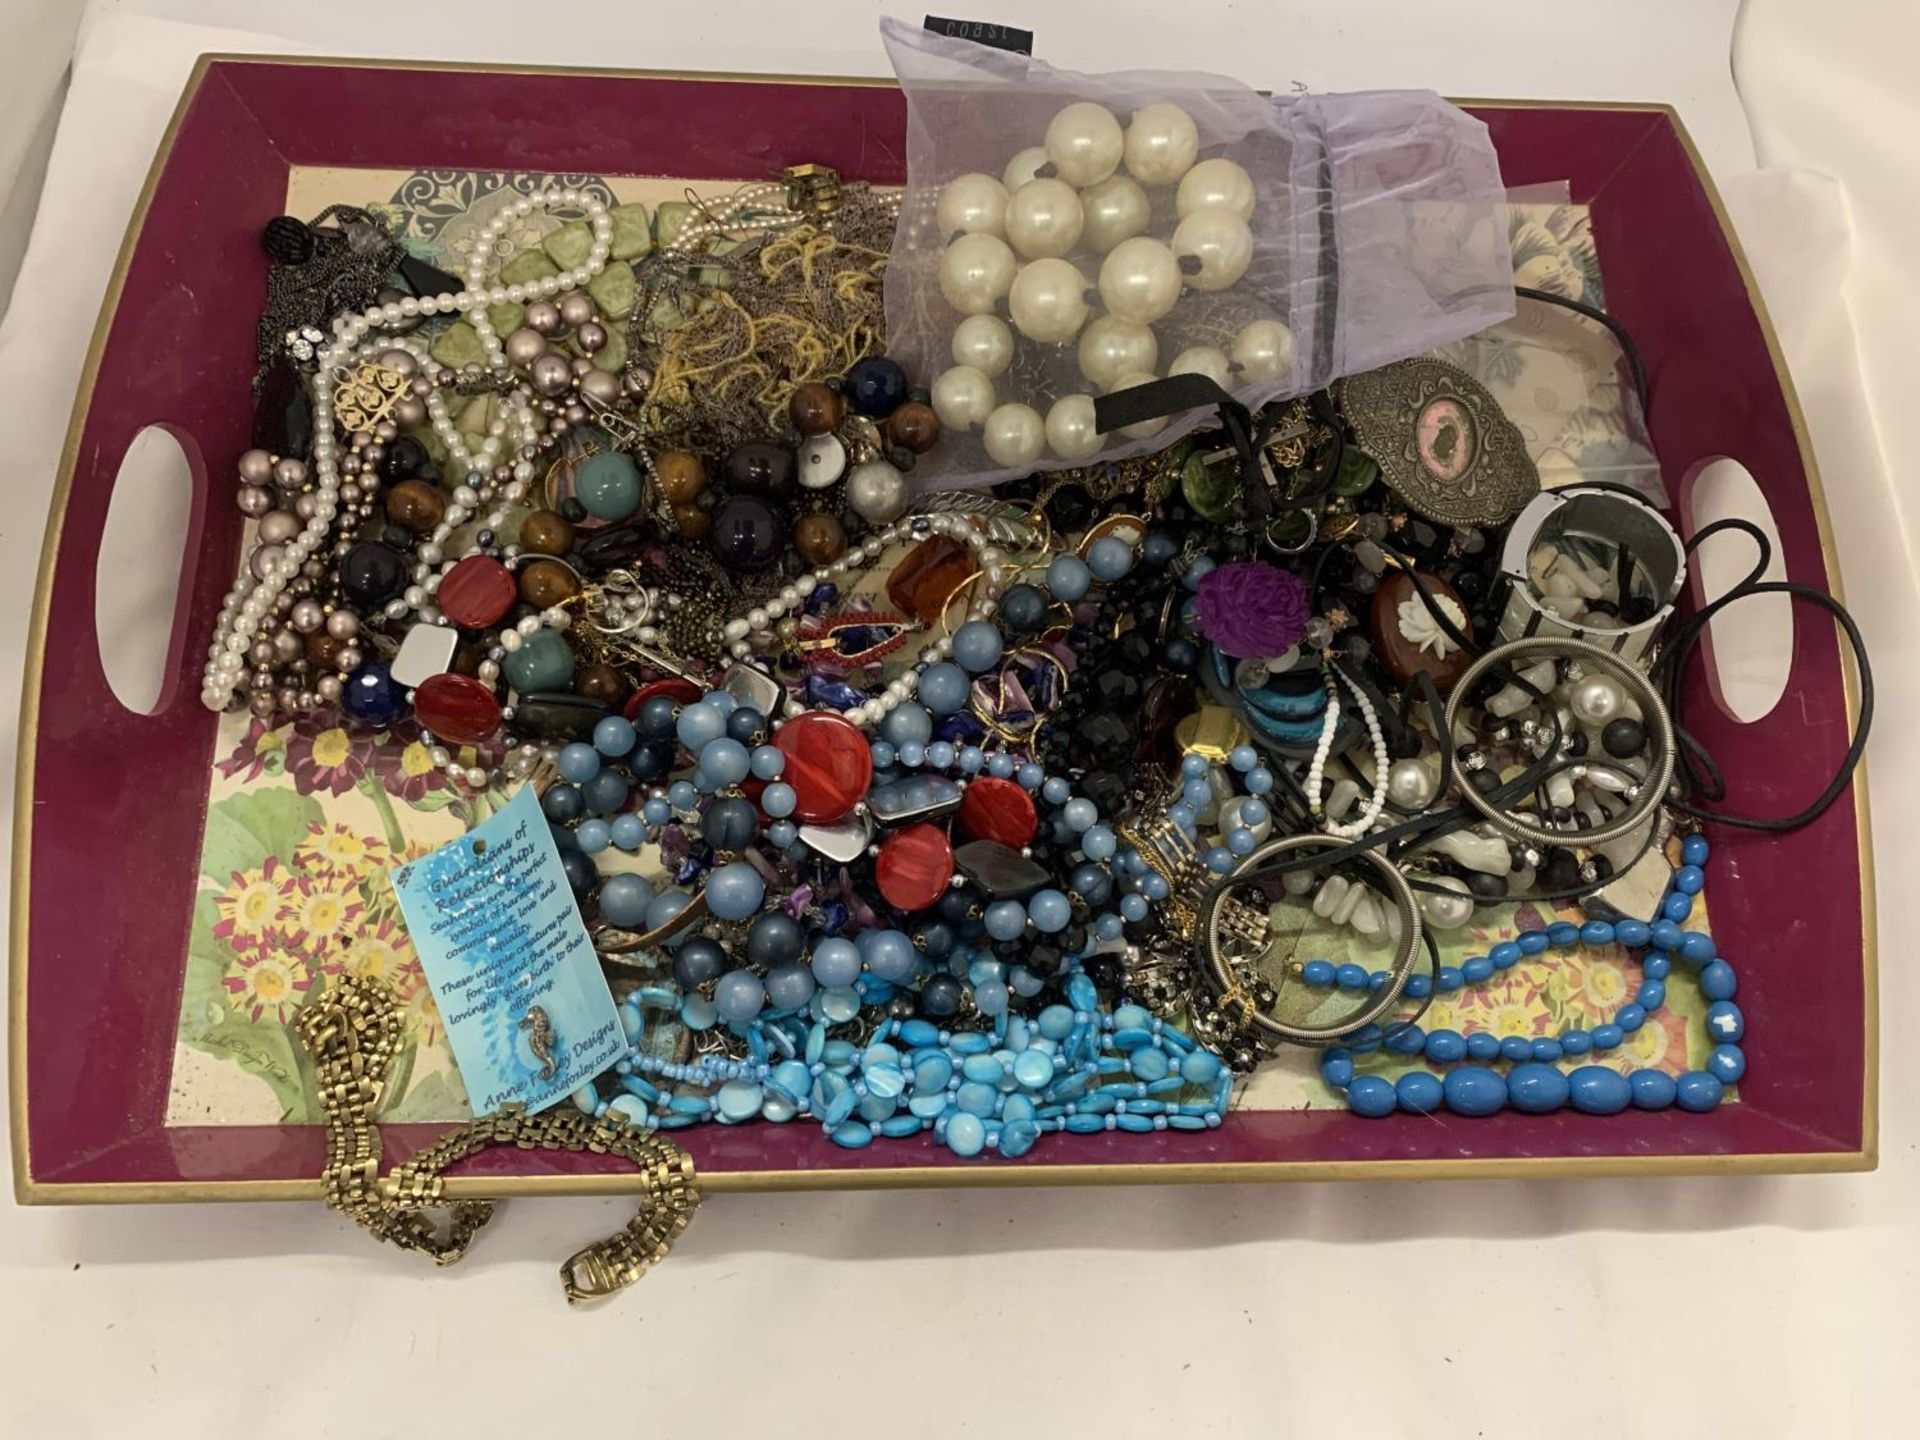 A QUANTITY OF COSTUME JEWELLERY TO INCLUDE NECKLACES, BRACELETS, EARRINGS, ETC ON A VINTAGE TRAY